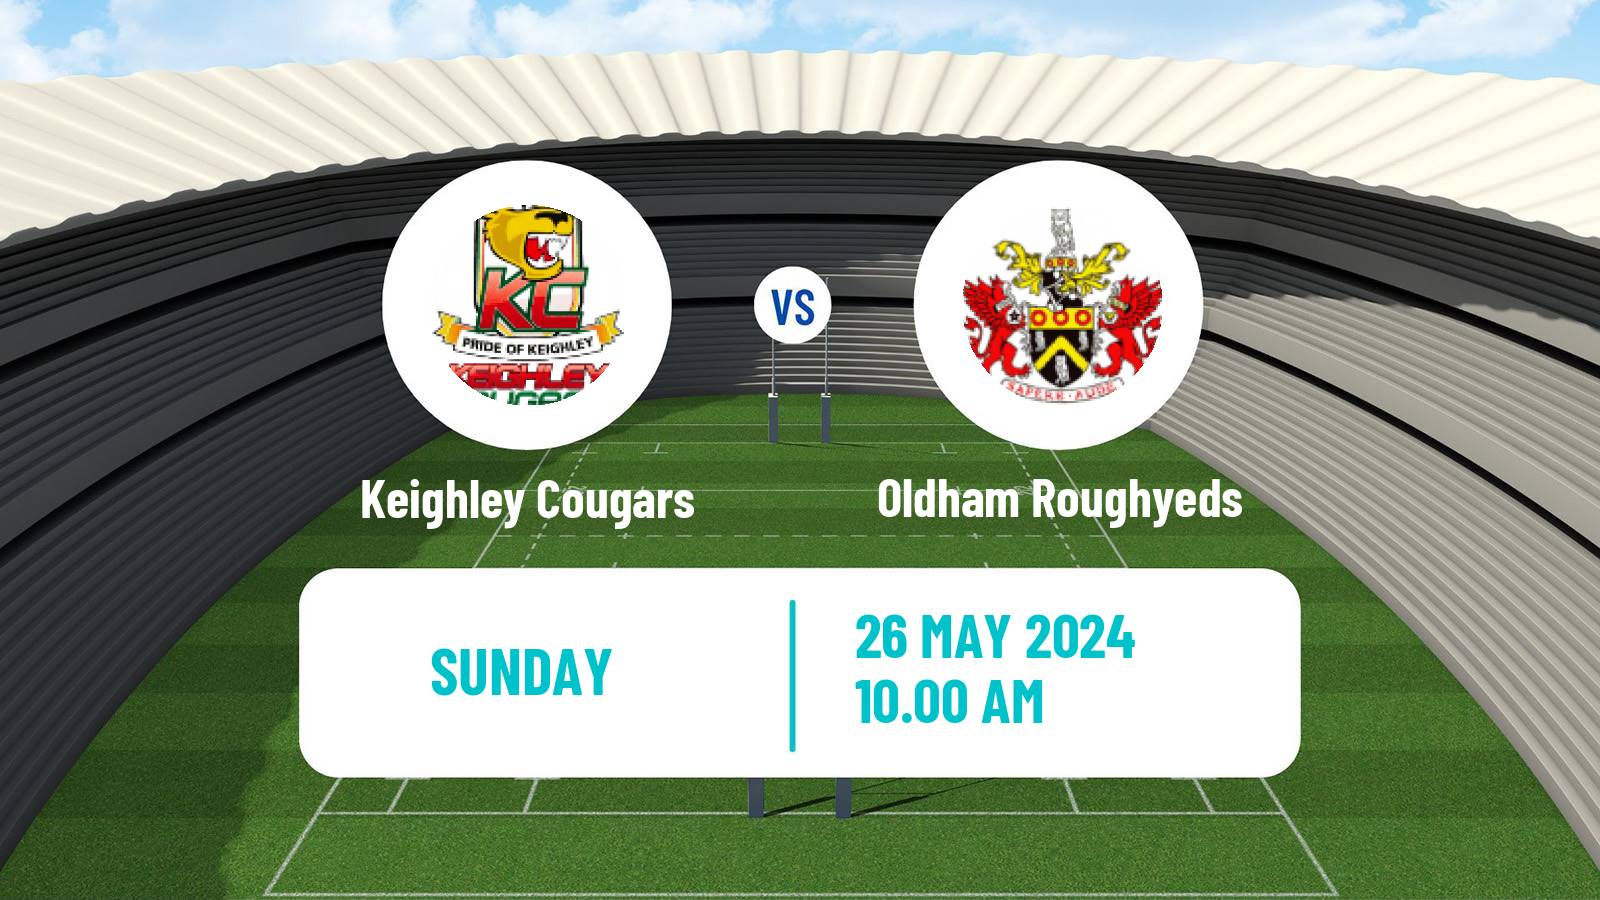 Rugby league English League 1 Rugby League Keighley Cougars - Oldham Roughyeds